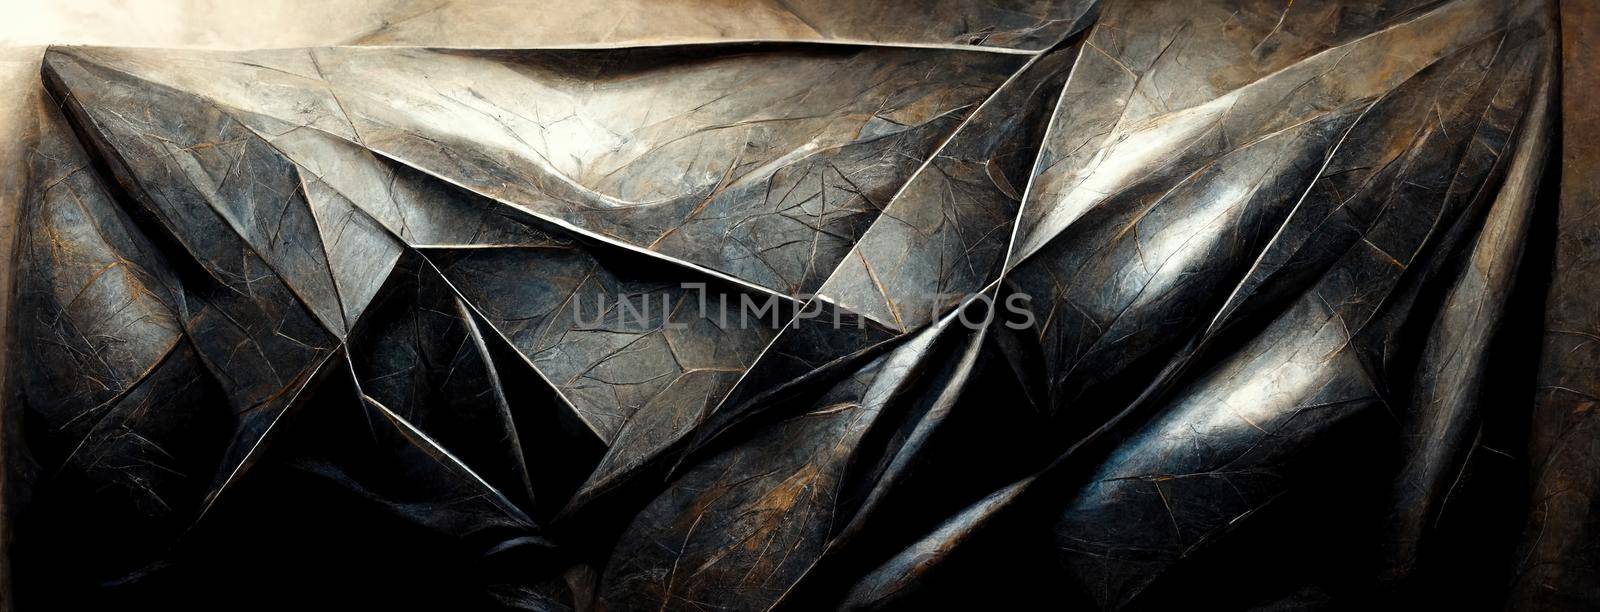 black stone glossy wall of polygons, Colorful abstract wallpaper texture background illustration by TRMK